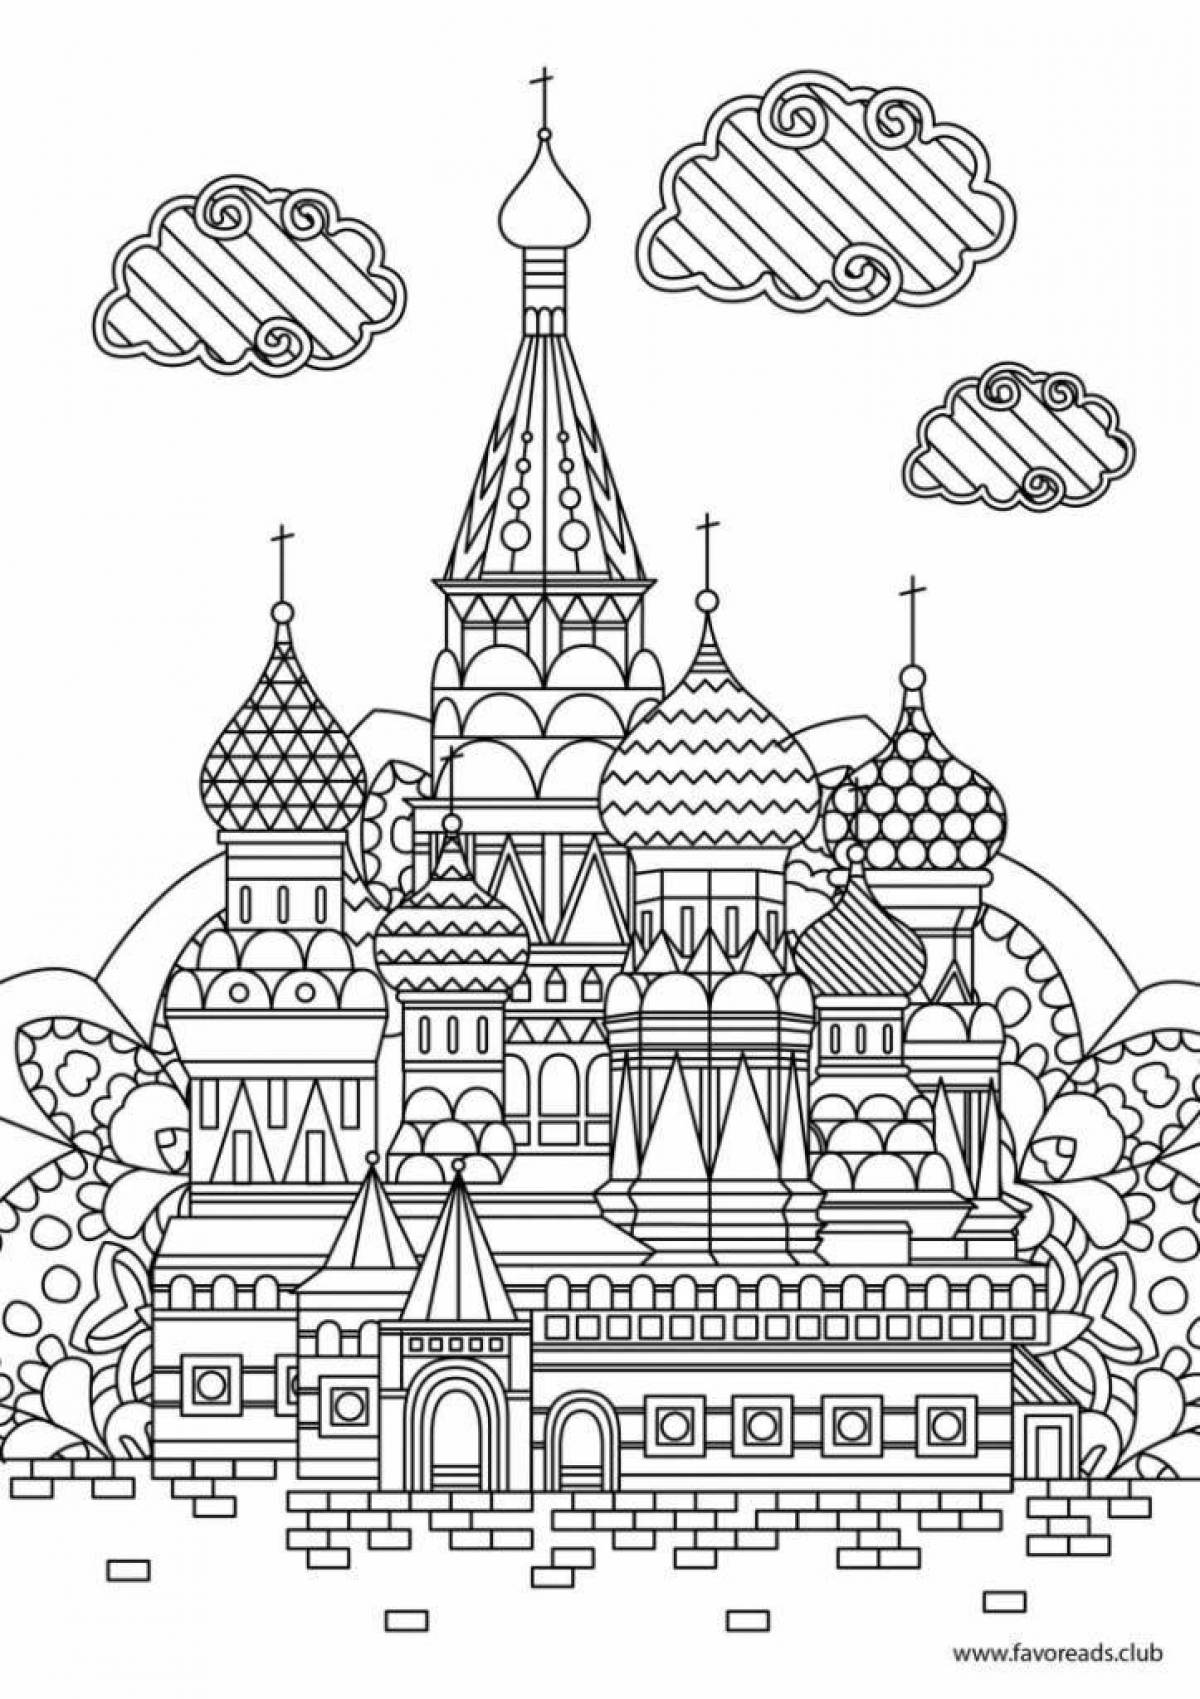 Awesome st basil's church coloring page